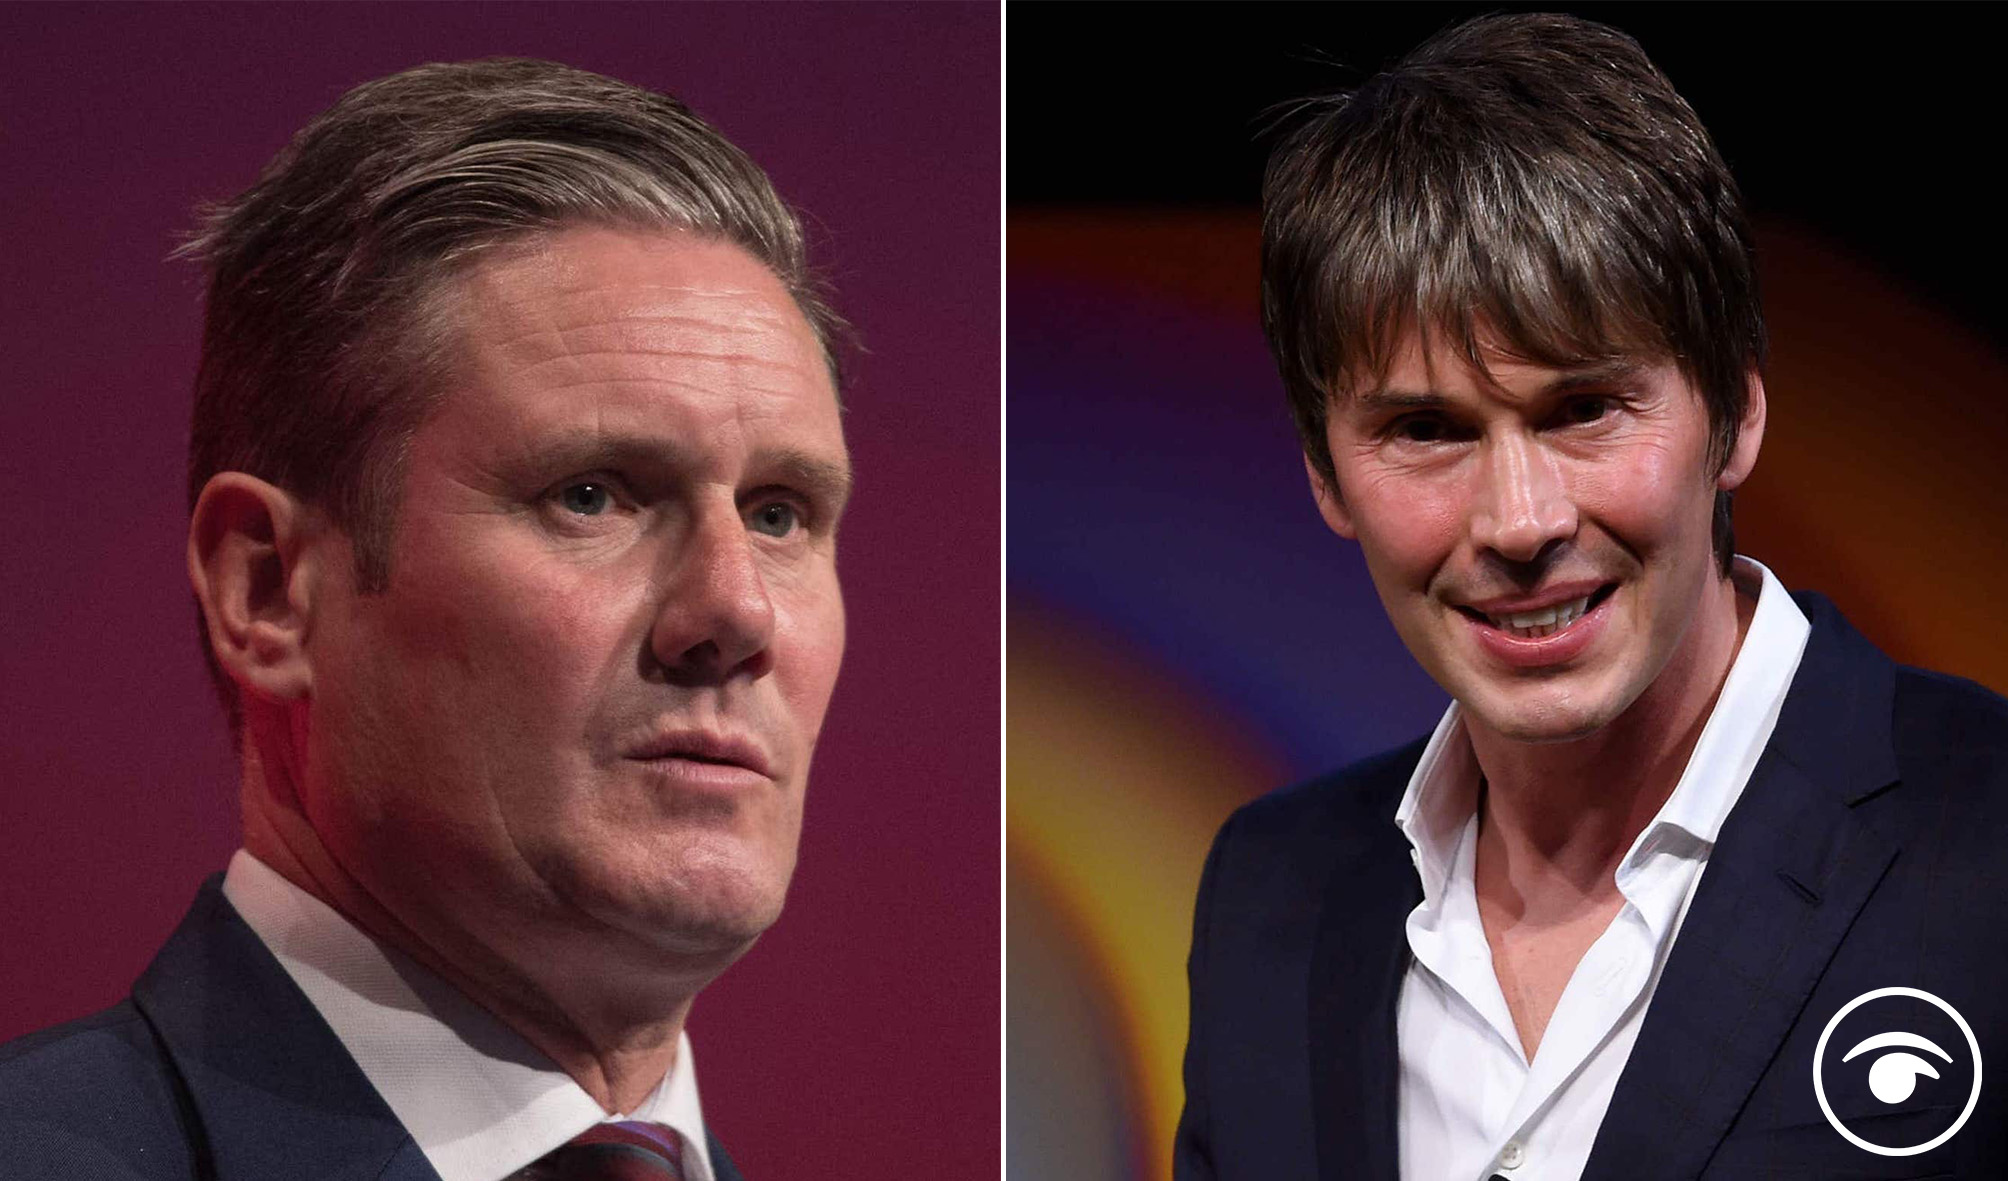 Prof Brian Cox’s stark message to Labour over Brexit has gone viral